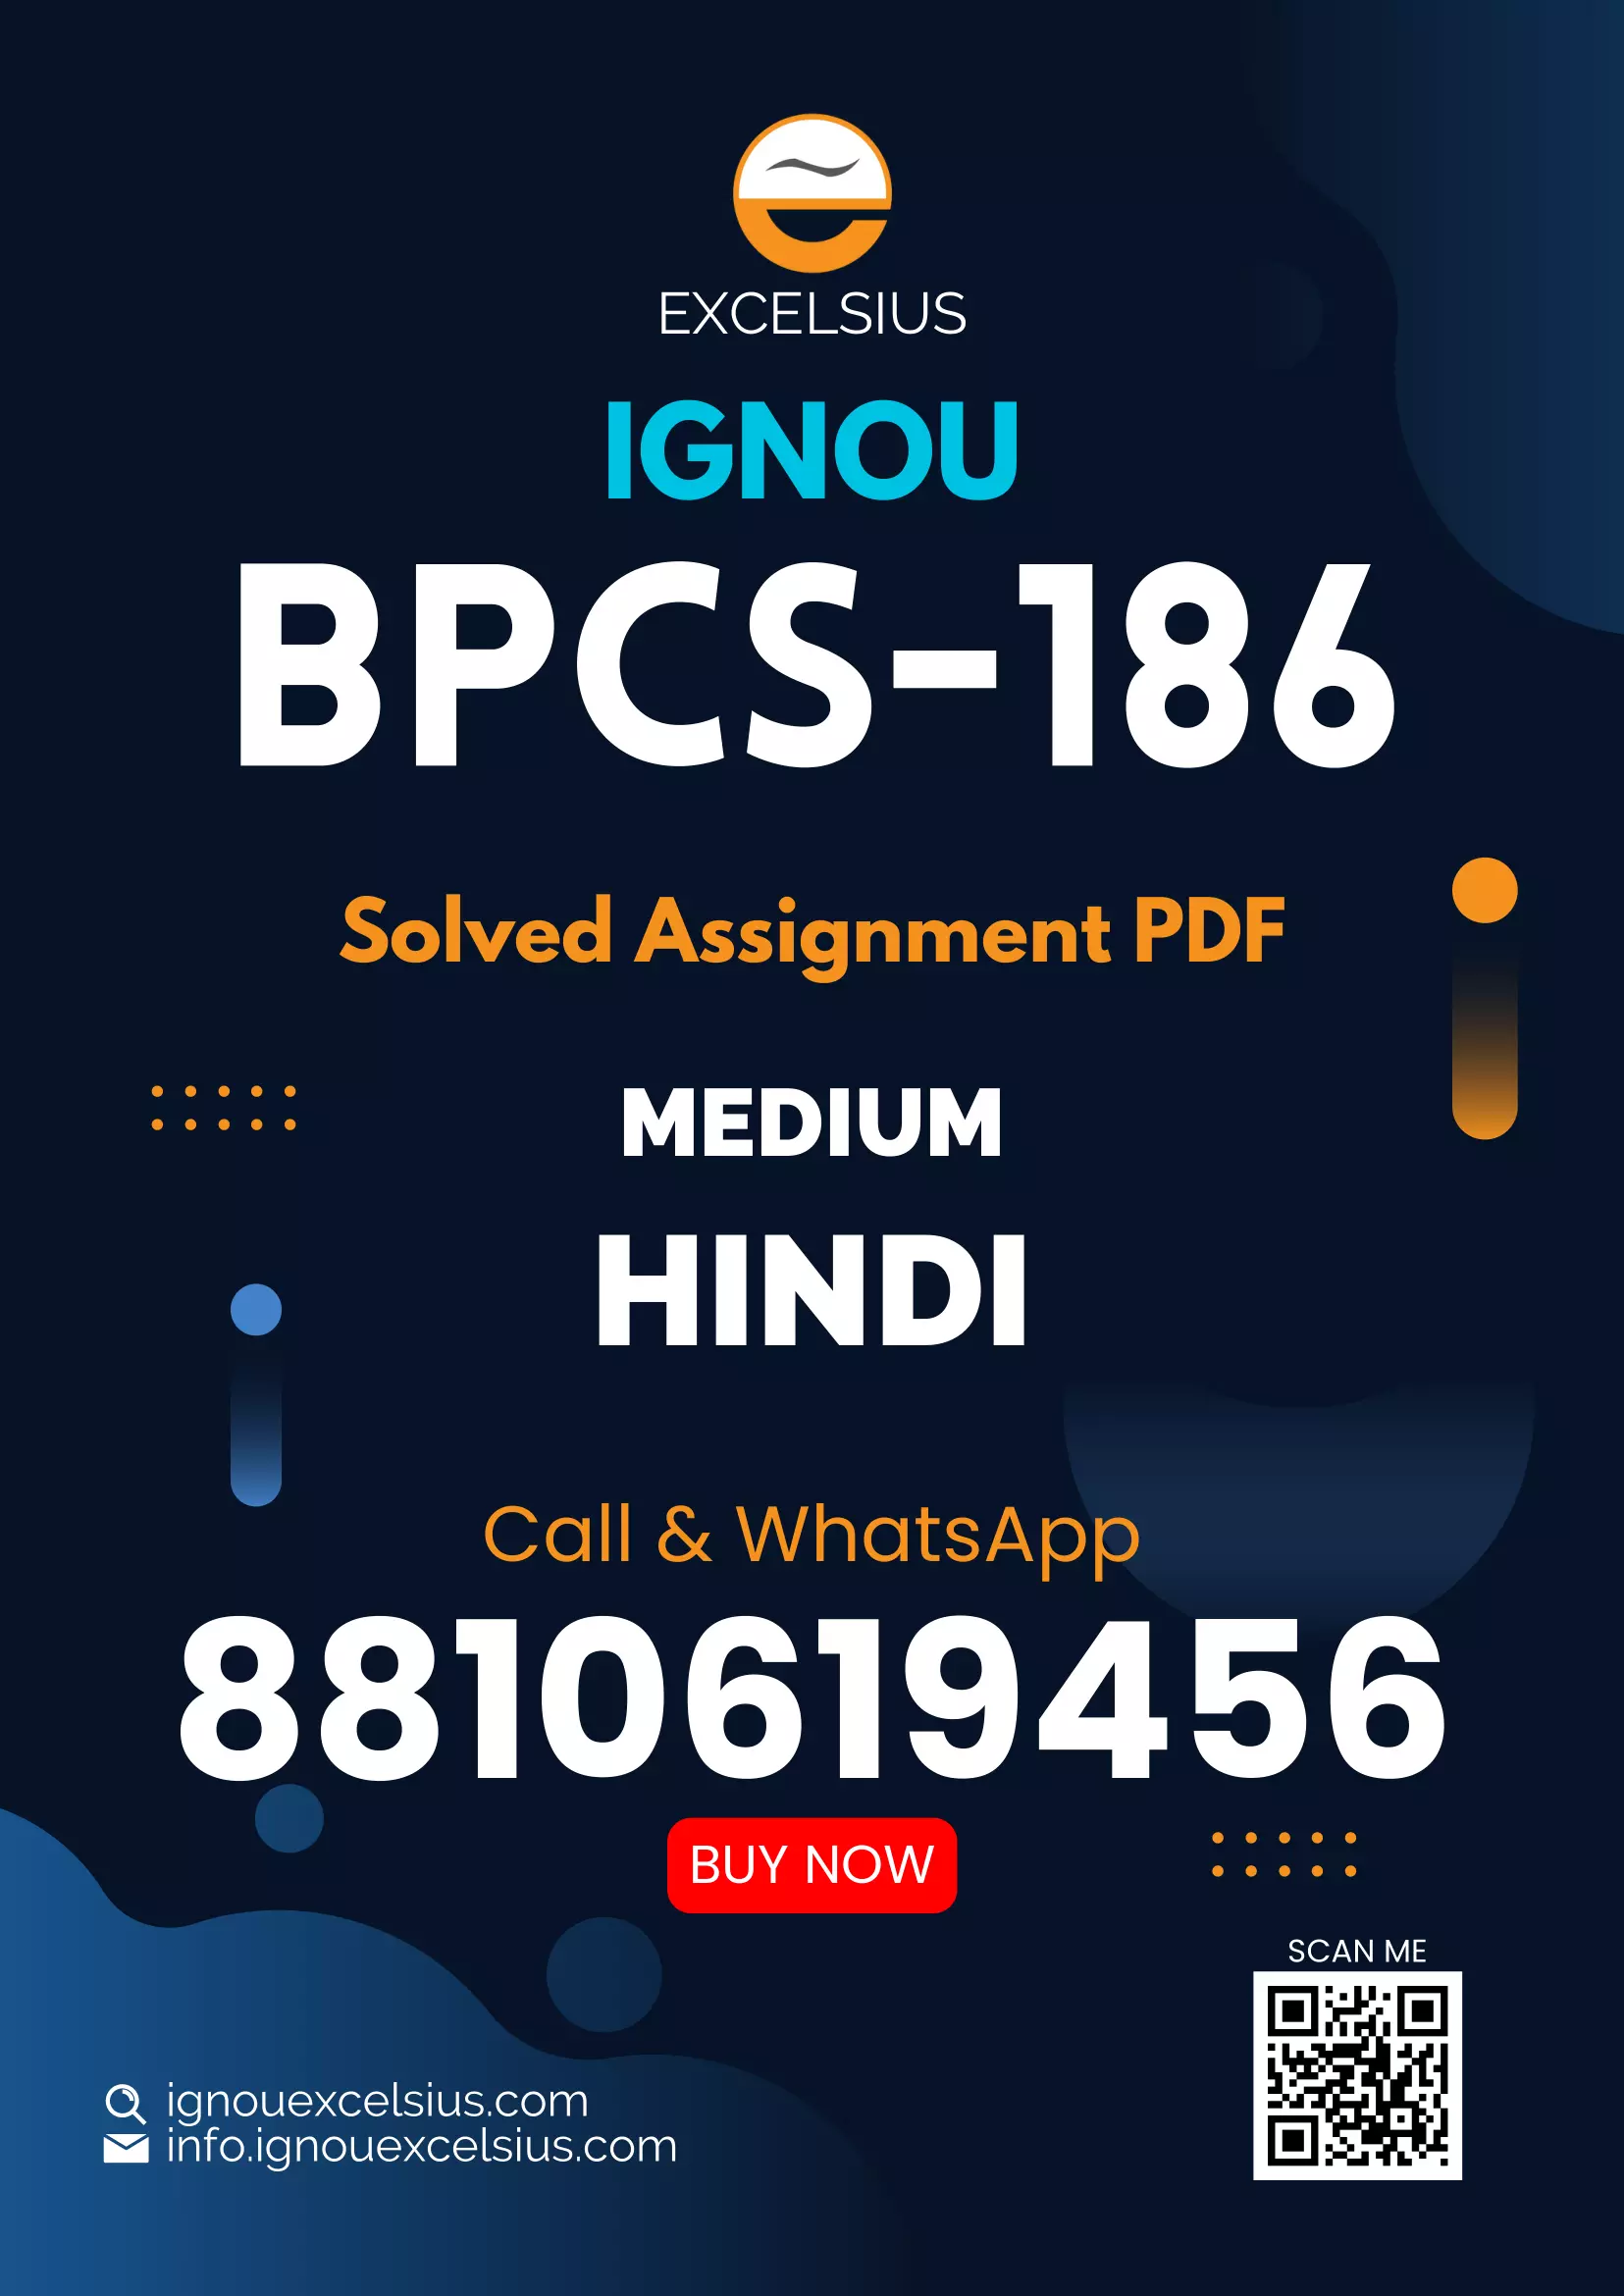 IGNOU BPCS-186 - Managing Stress, Latest Solved Assignment-July 2022 – January 2023